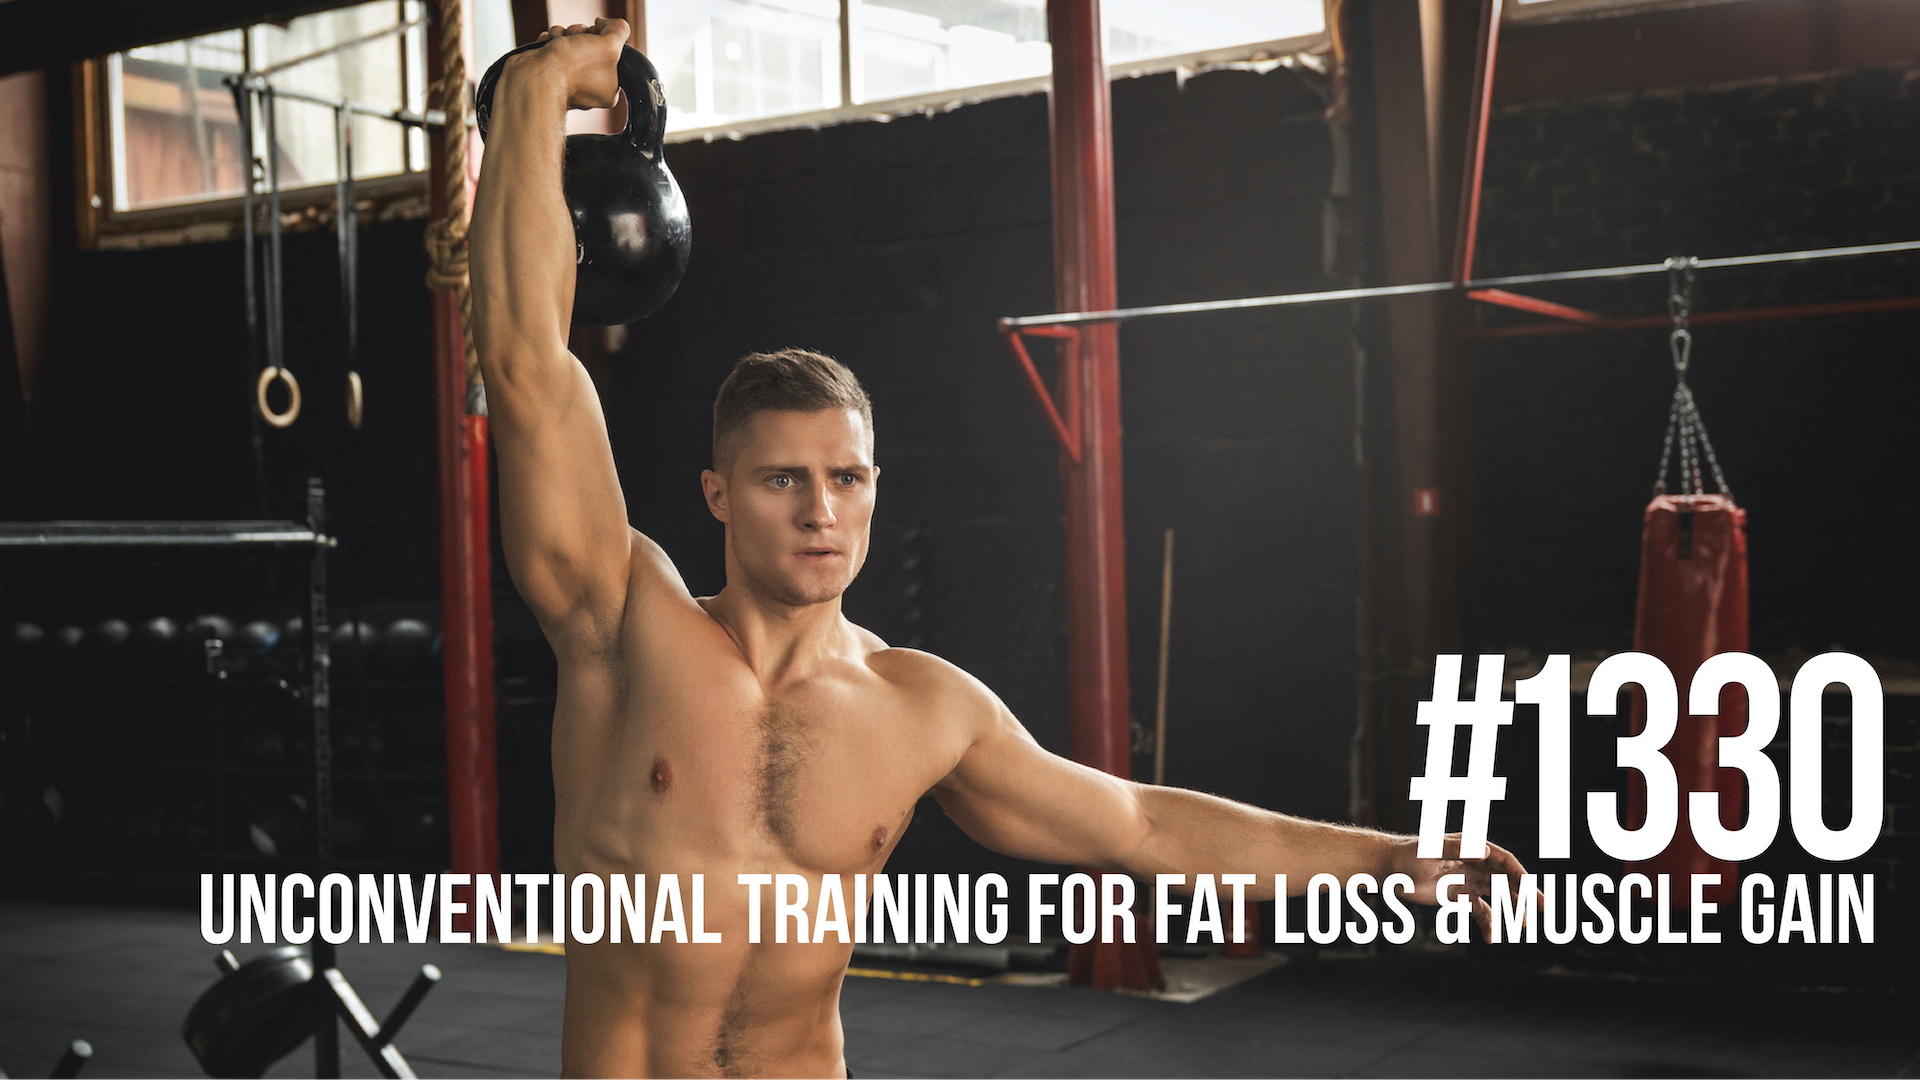 1330: Unconventional Training for Fat Loss and Muscle Gain